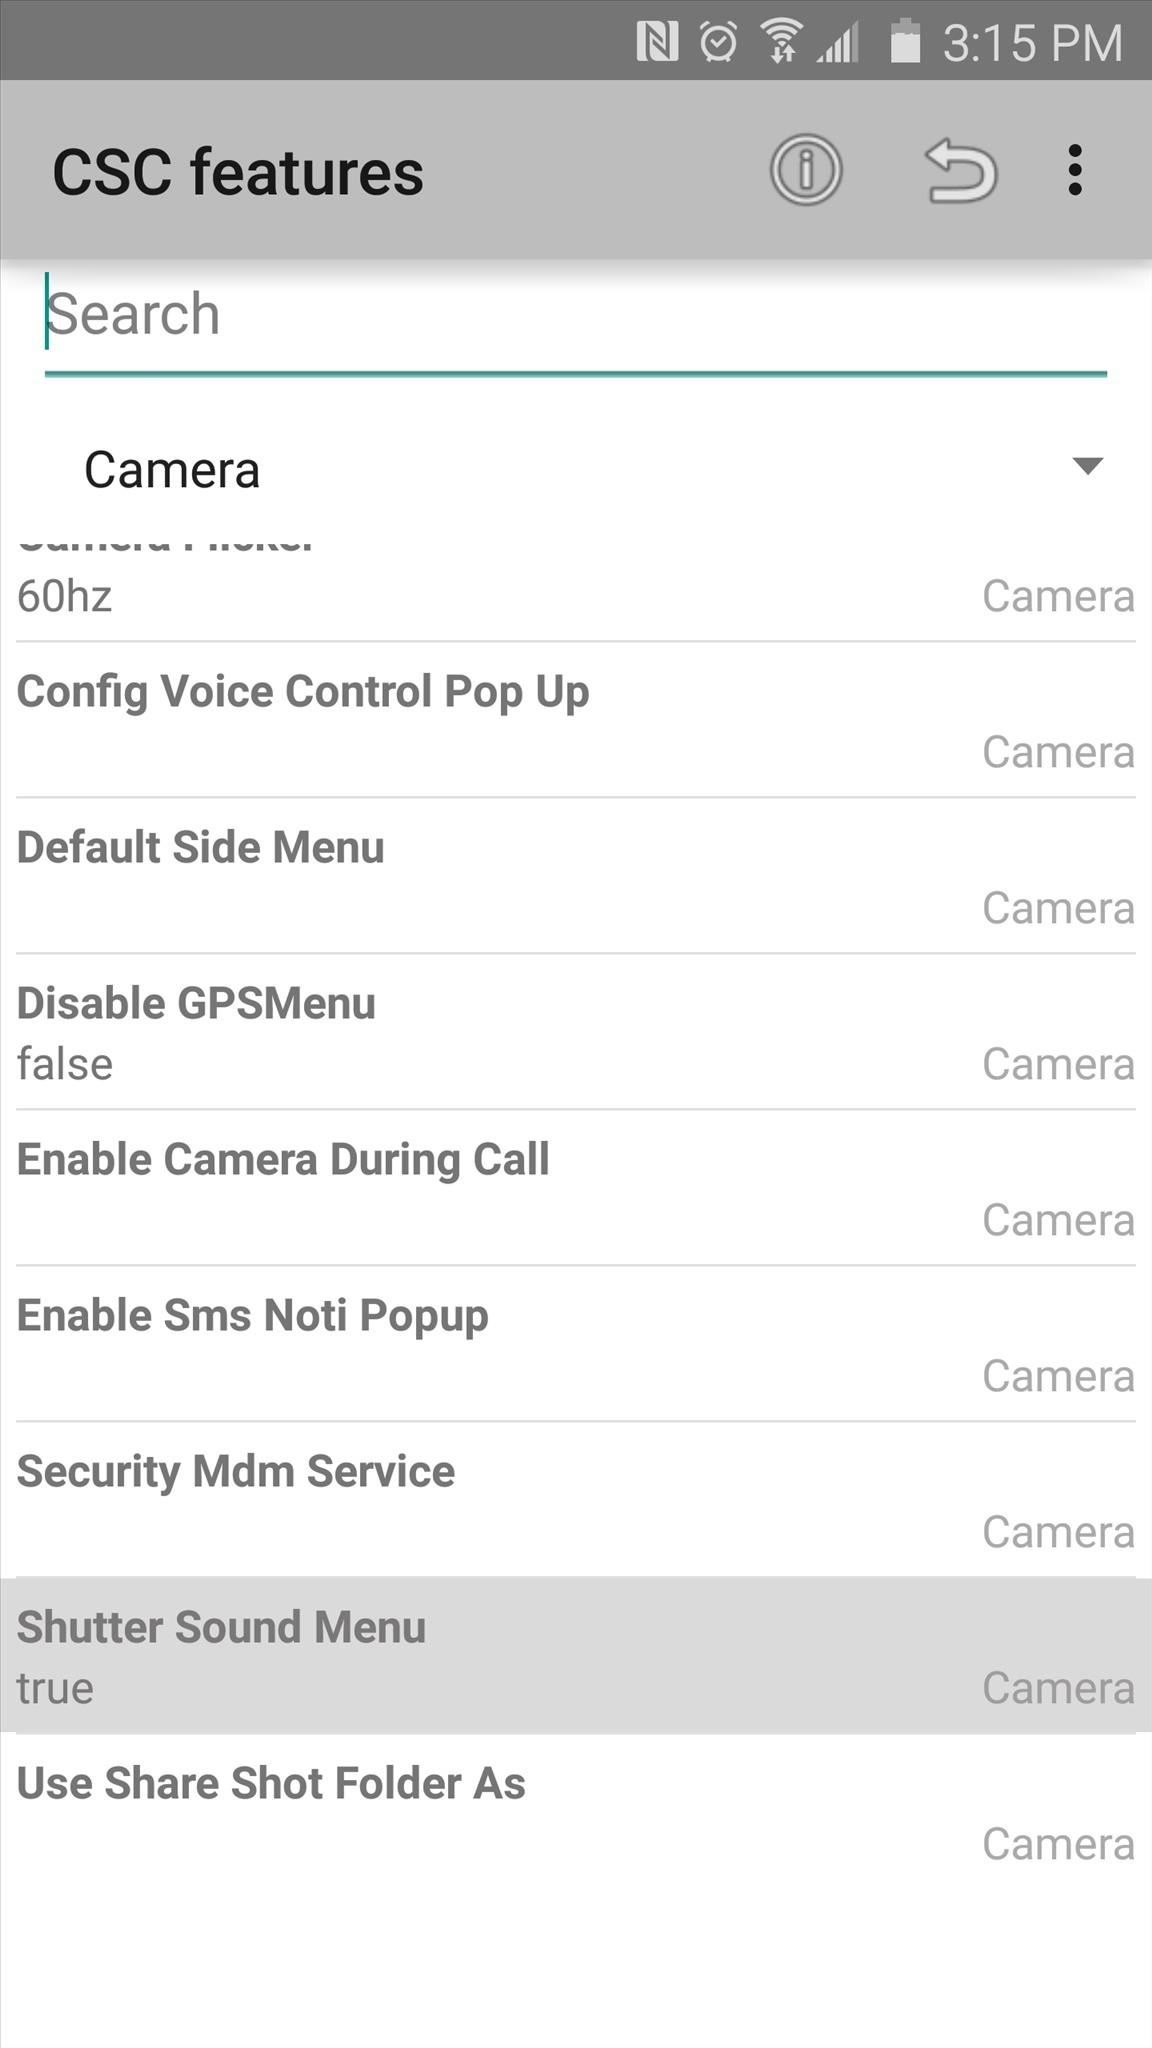 Mute Shutter Sounds, Schedule Texts, Disable Status Bar Icons, & More on Your Galaxy S6